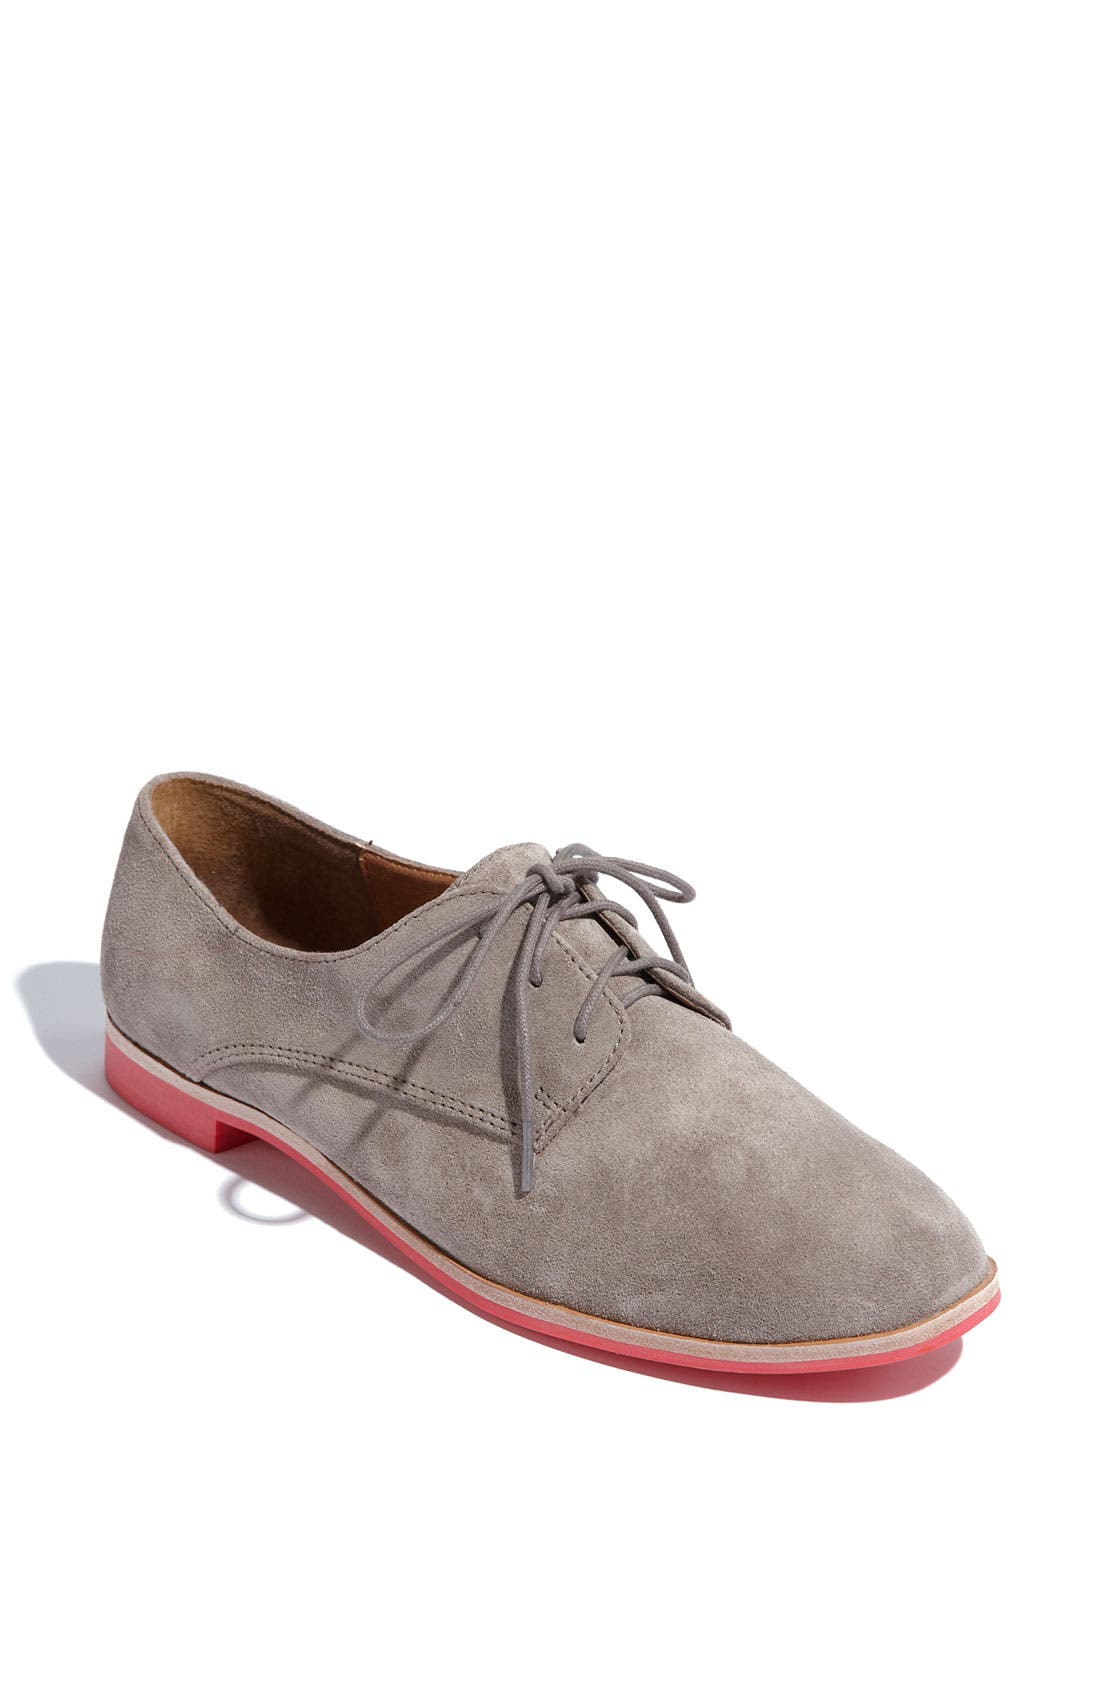 DV by Dolce Vita 'Mini' Suede Lace-Up 